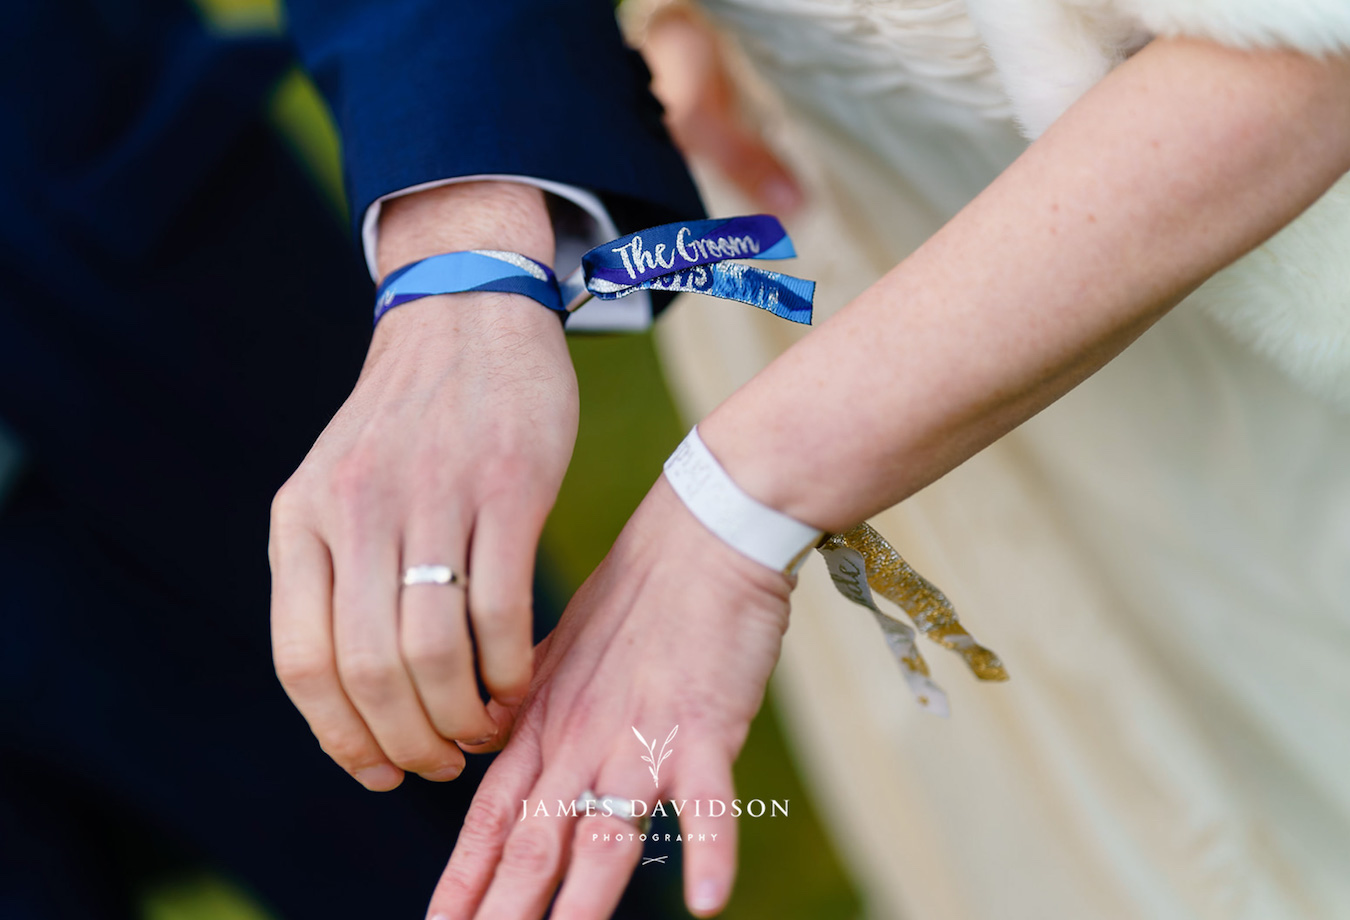 festival wedding wristbands for bride and groom